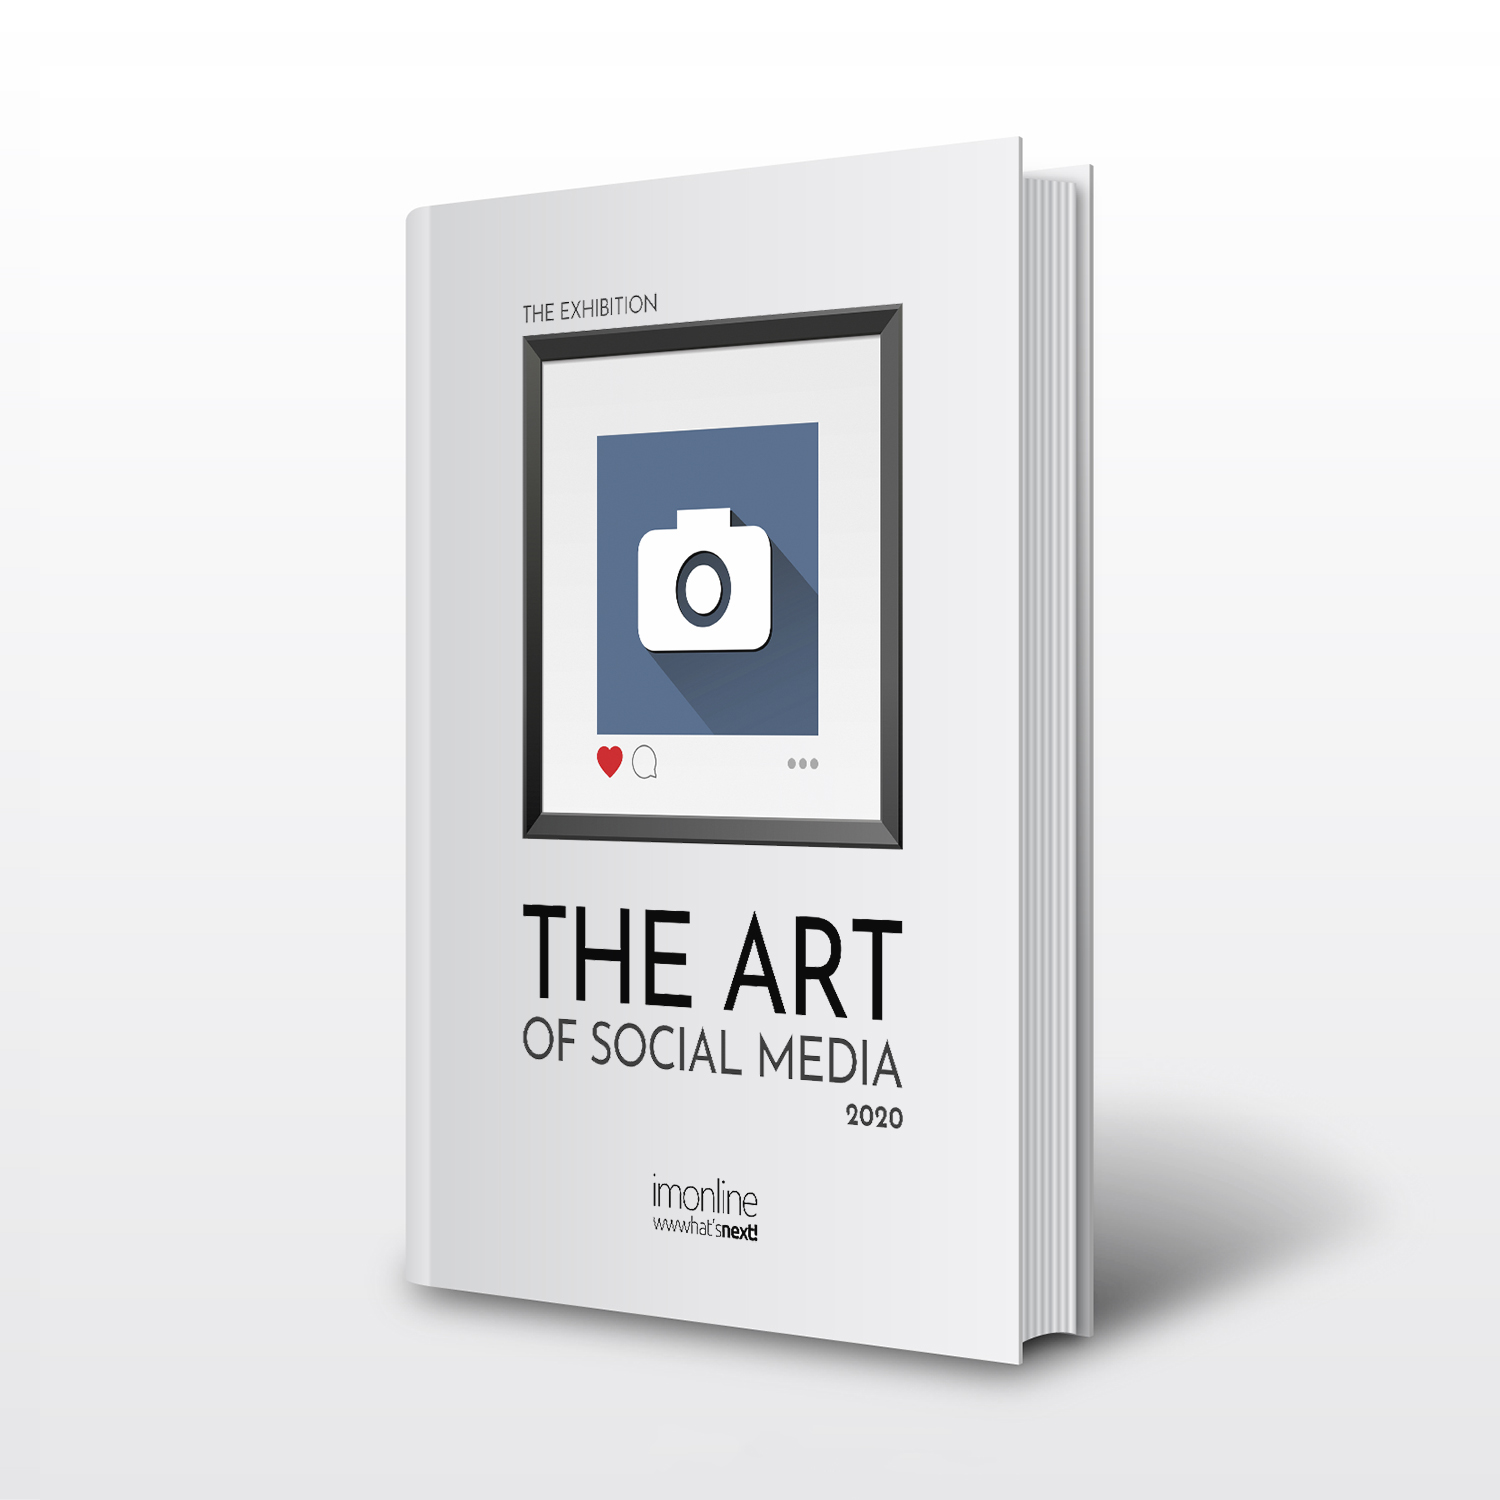 Download the ebook of the exhibition for free